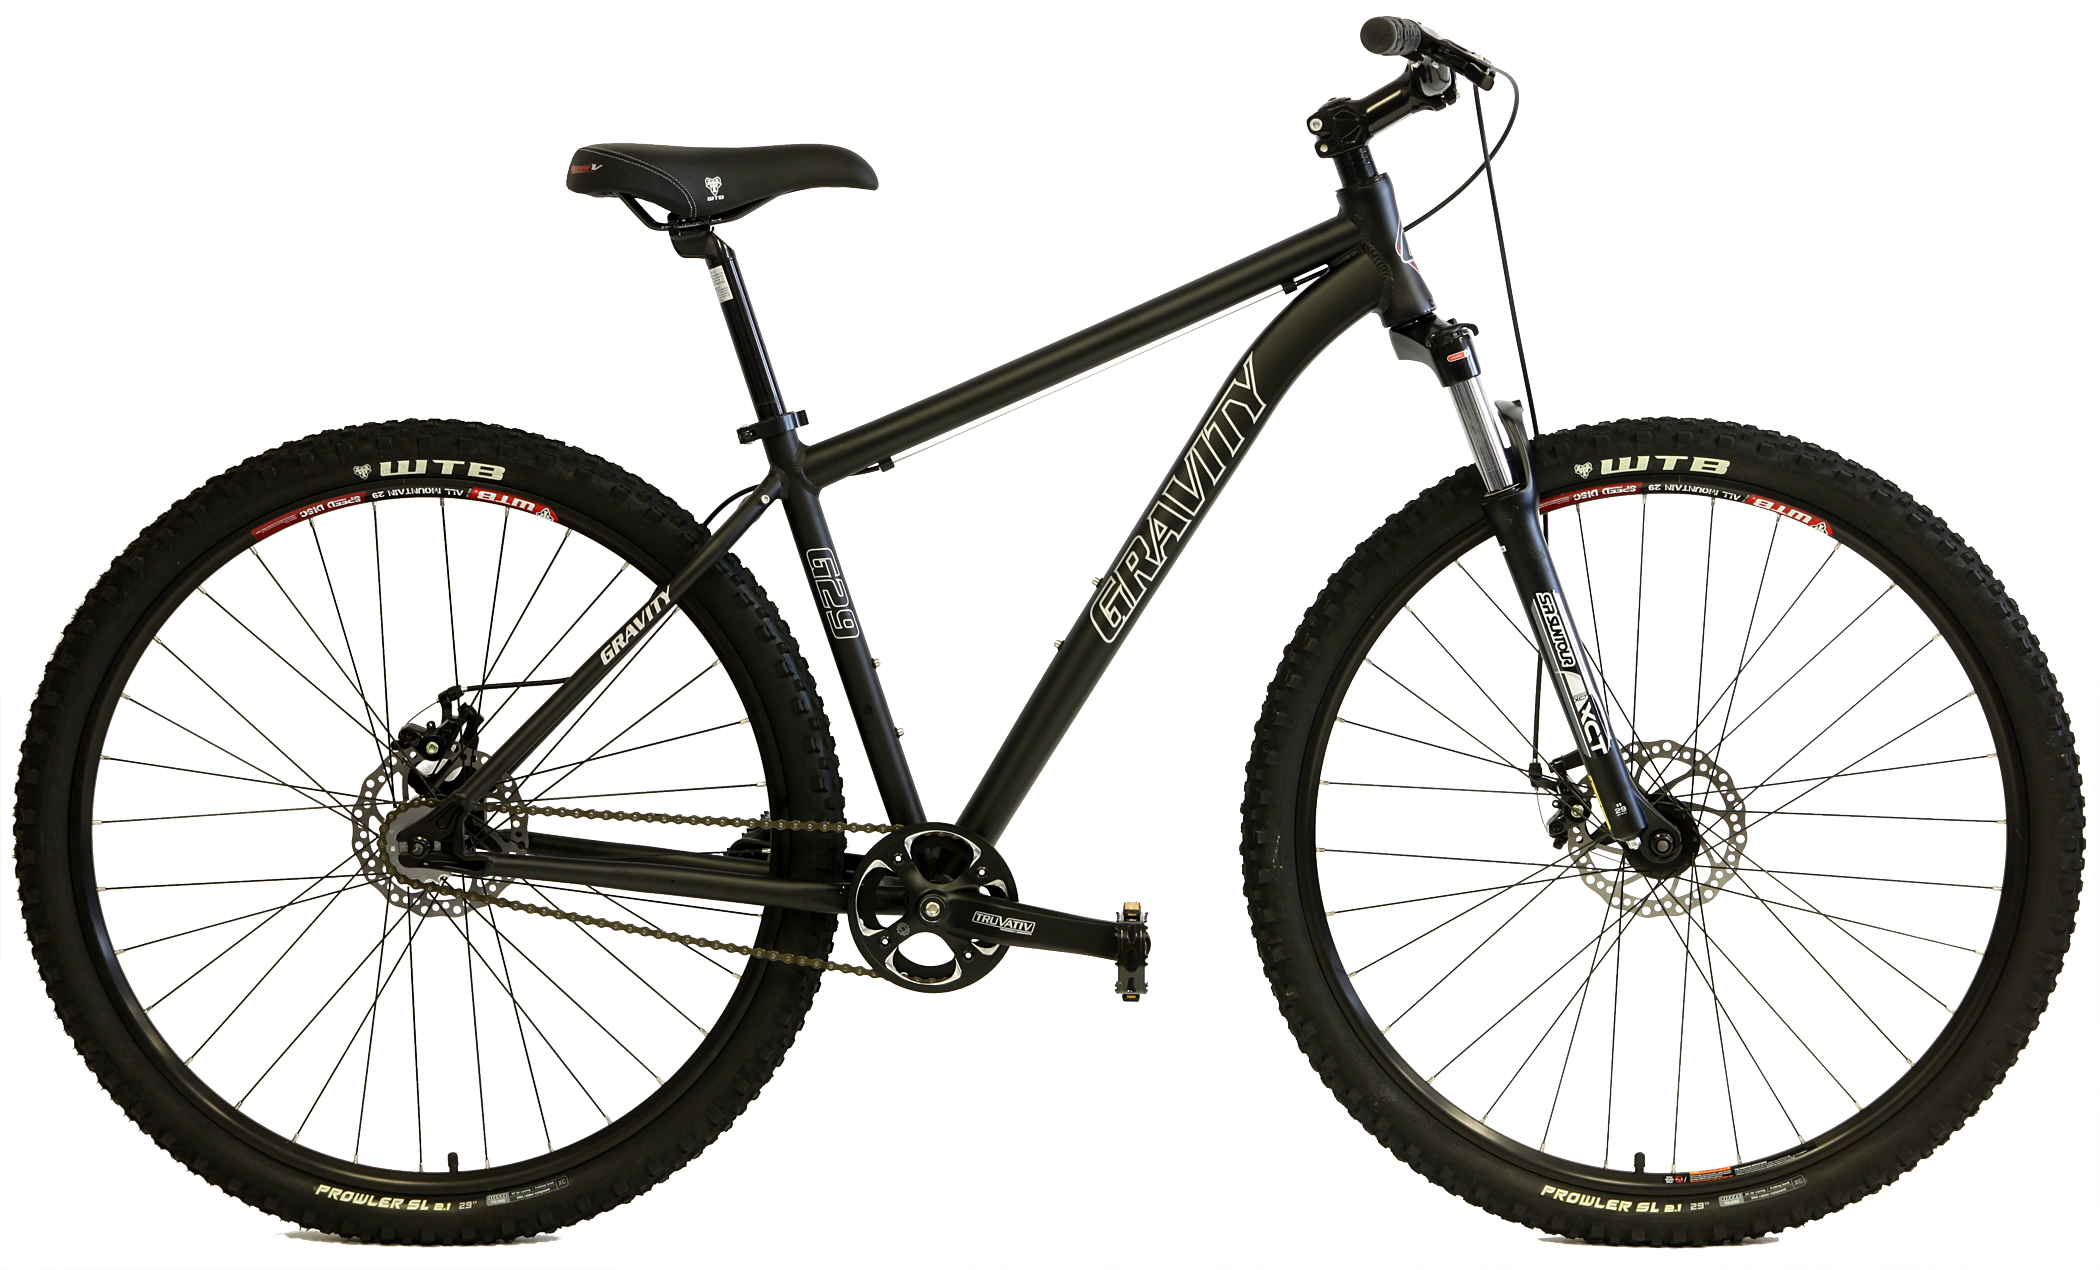 X-Sold Out | GRAVITY G29 FS | FS SINGLE ALUMINUM ATB w/ DISC BRAKES & SHOCK | BikeShopWarehouse.com | <b>Join the 29er <br> If you have ridden one